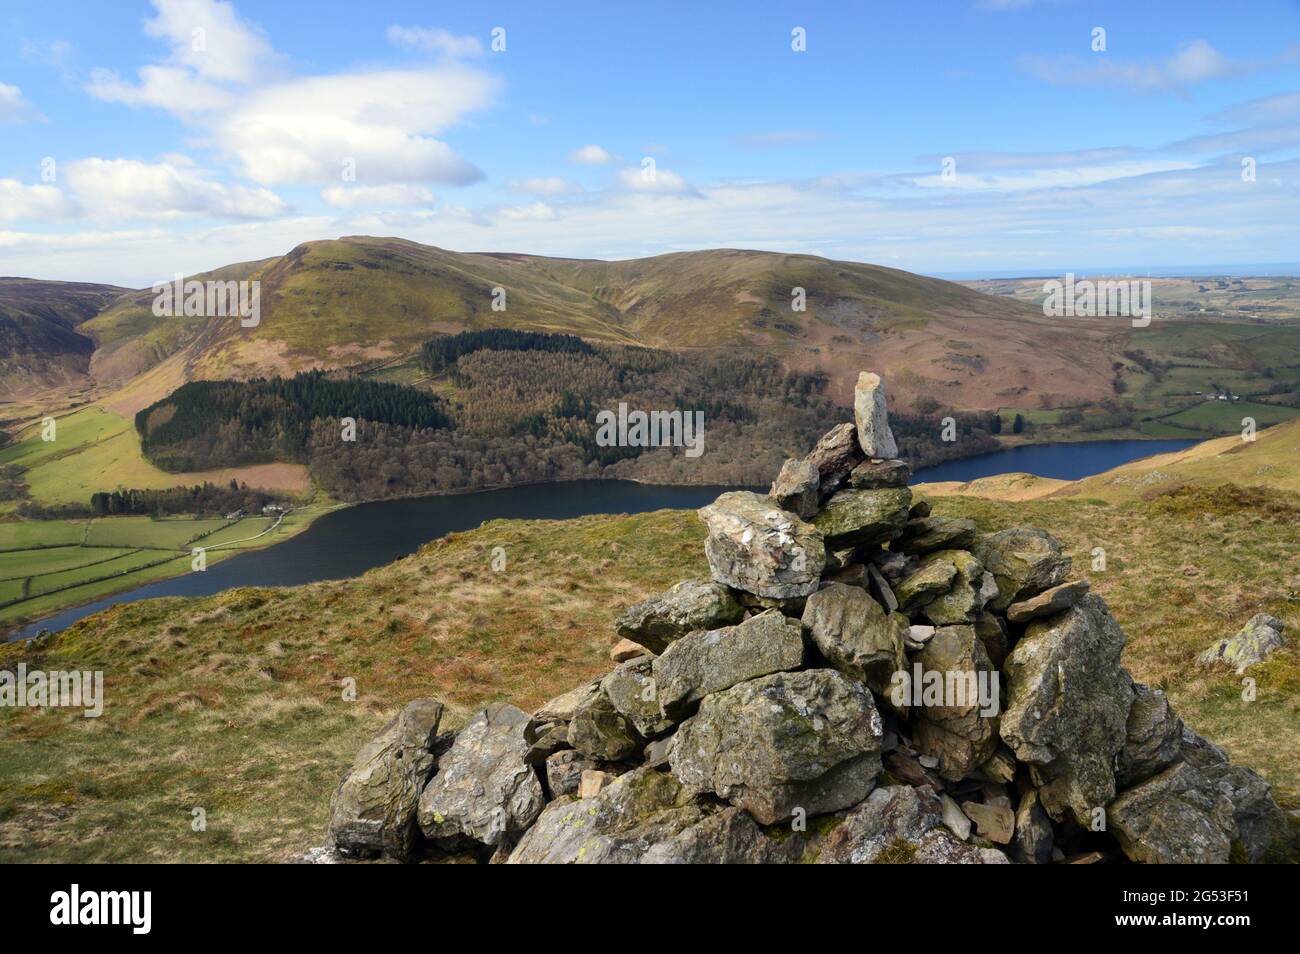 Carling Knott and the Wainwright Burnbank Fell above Loweswater Lake from the Pile of Stones (Cairn) on the Summit of Loweswater Fell, Cumbria, UK. Stock Photo